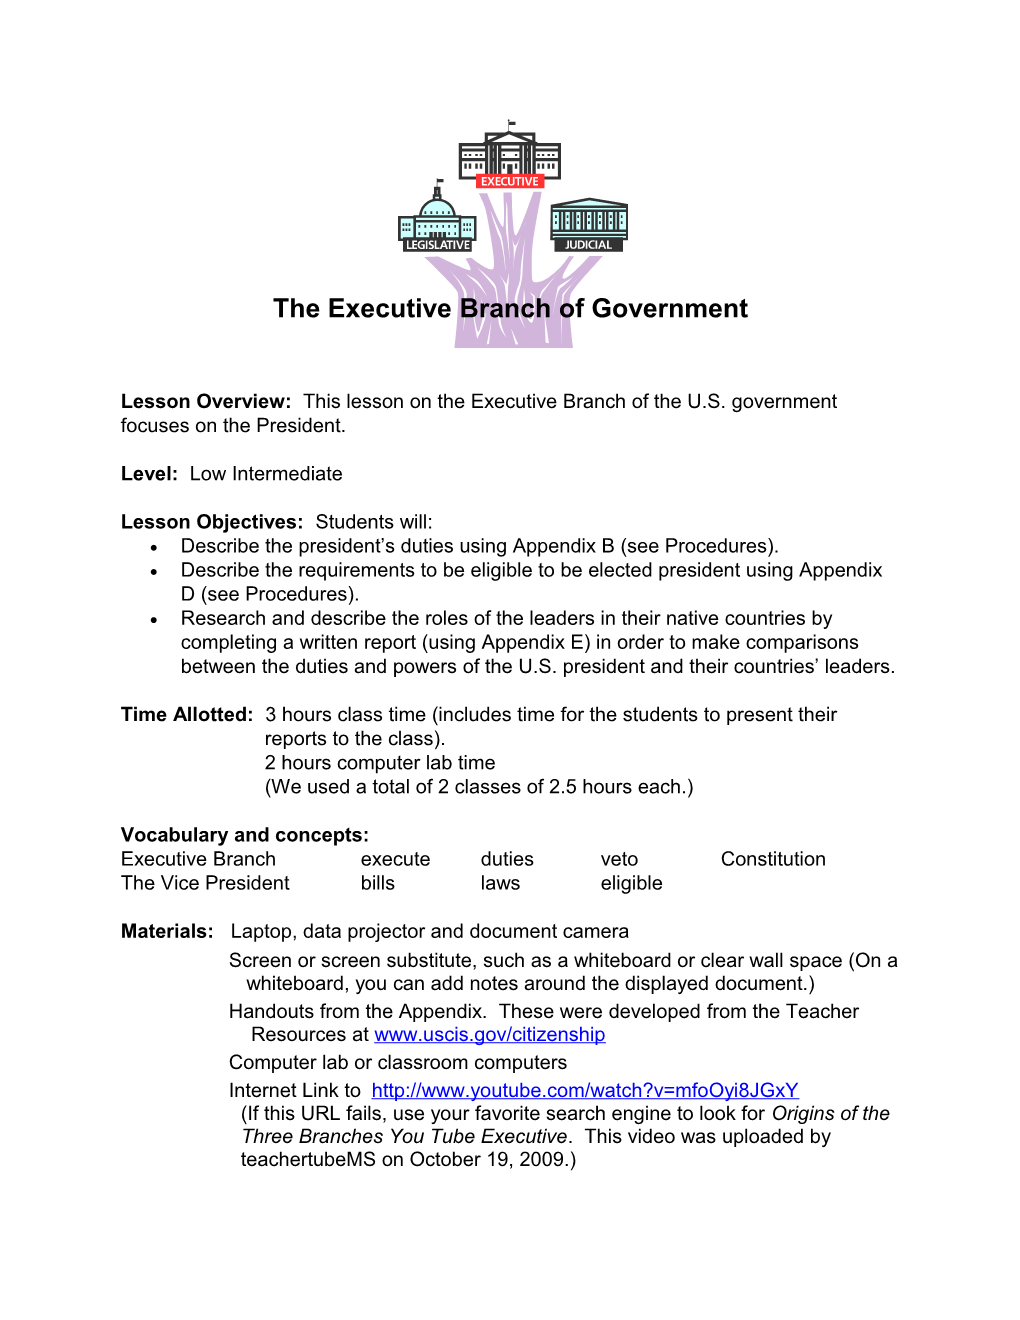 The Executive Branch of Government